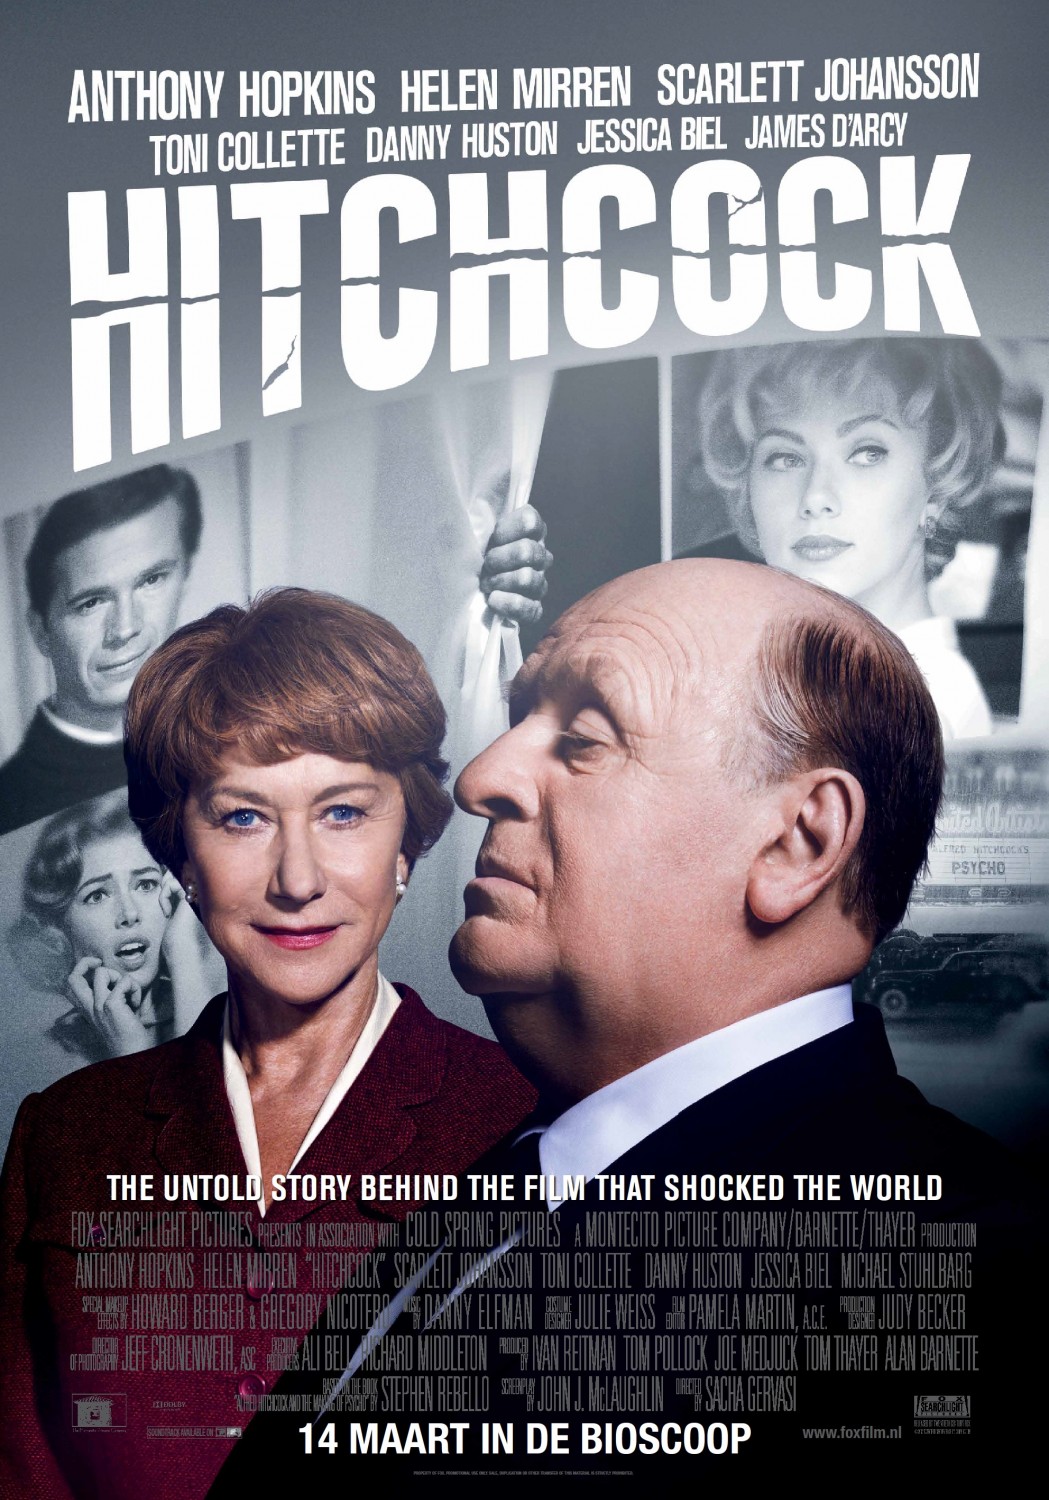 Extra Large Movie Poster Image for Hitchcock (#6 of 7)